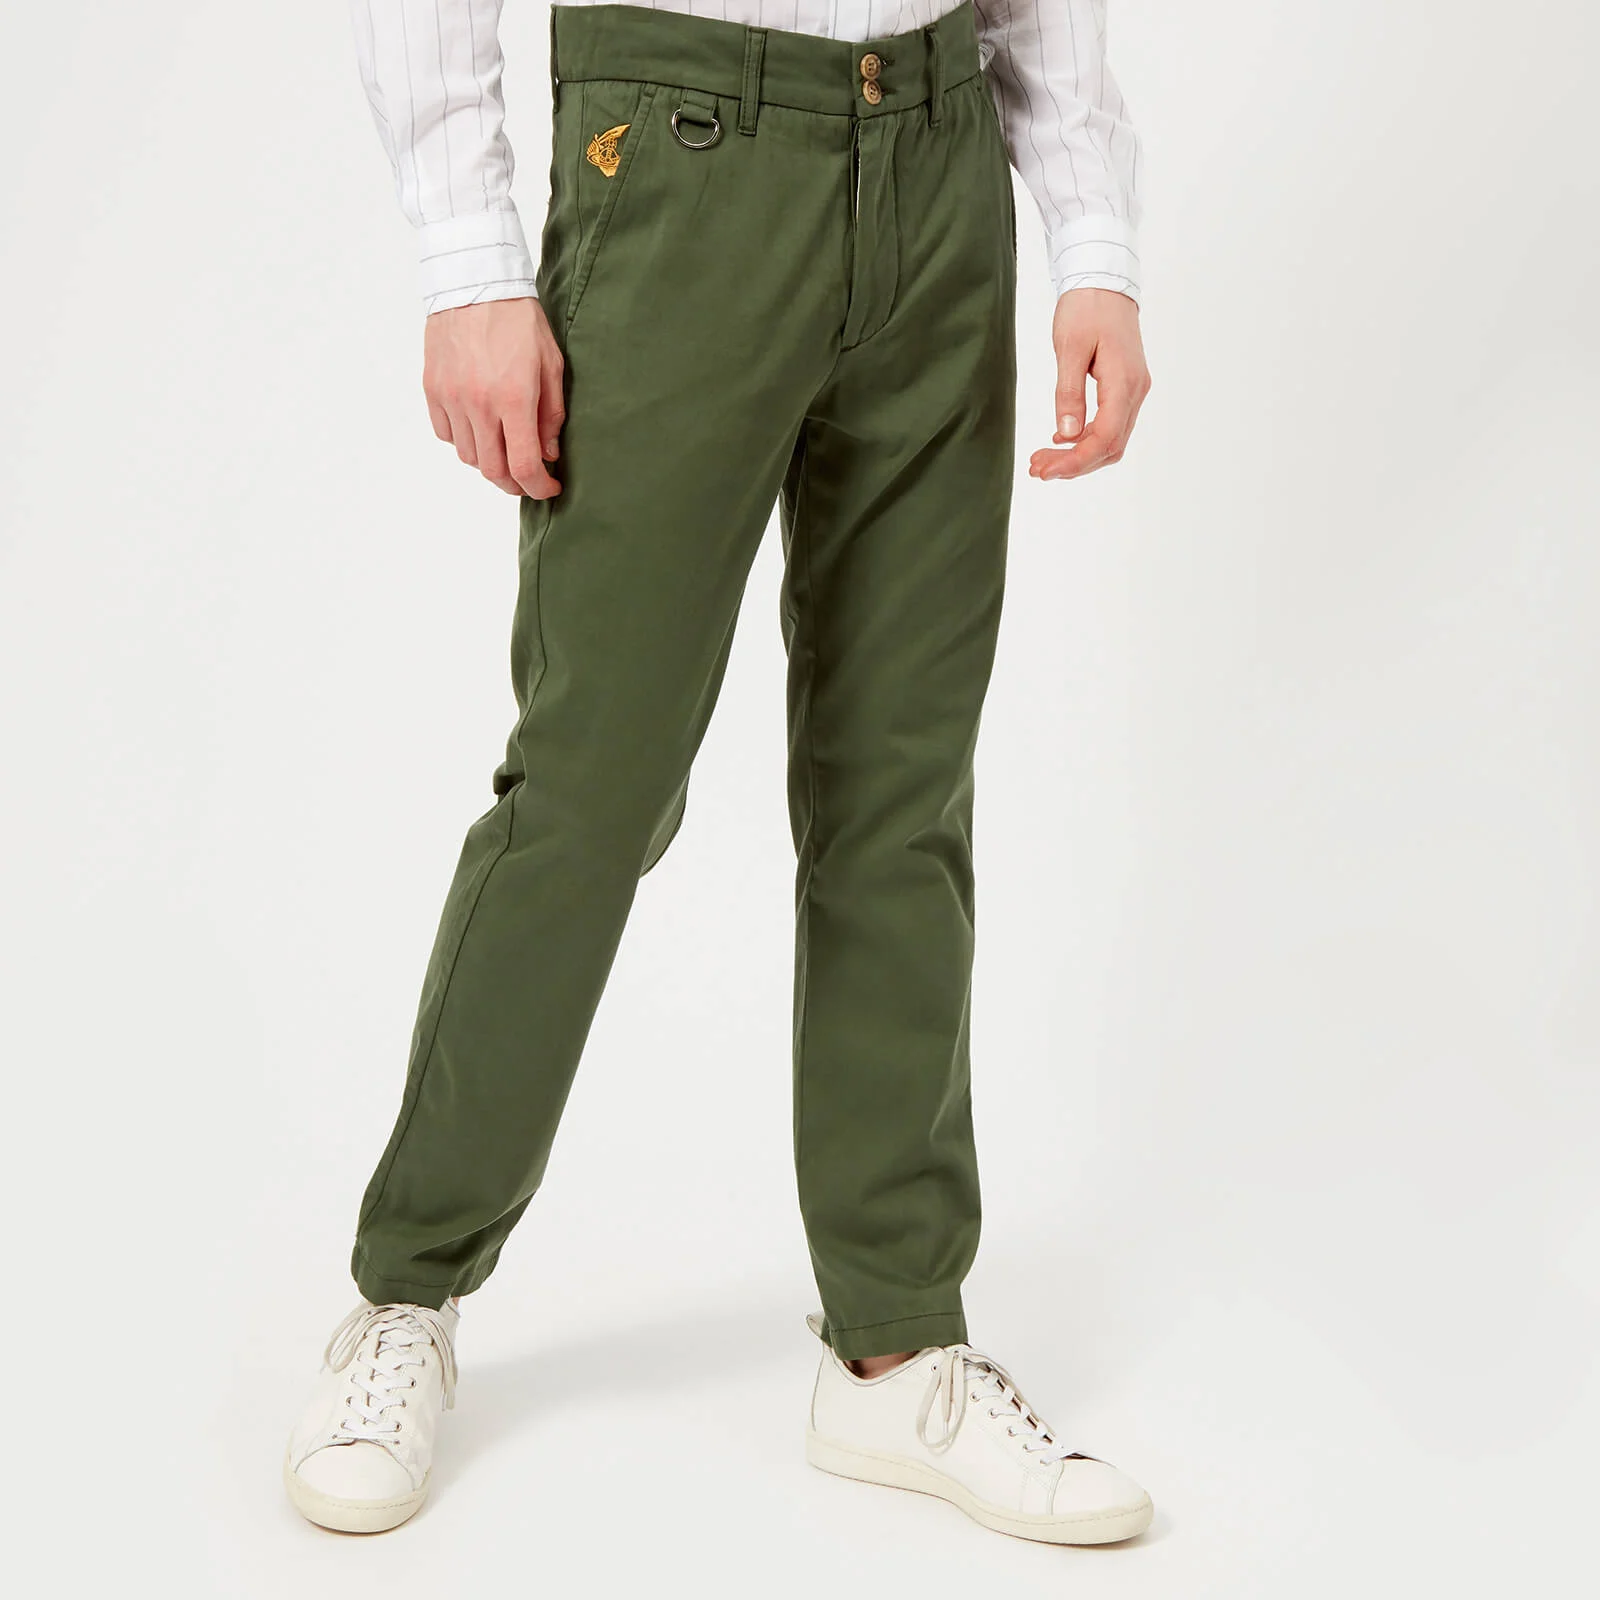 Vivienne Westwood Anglomania Men's Classic Chinos - Dark Green Image 1